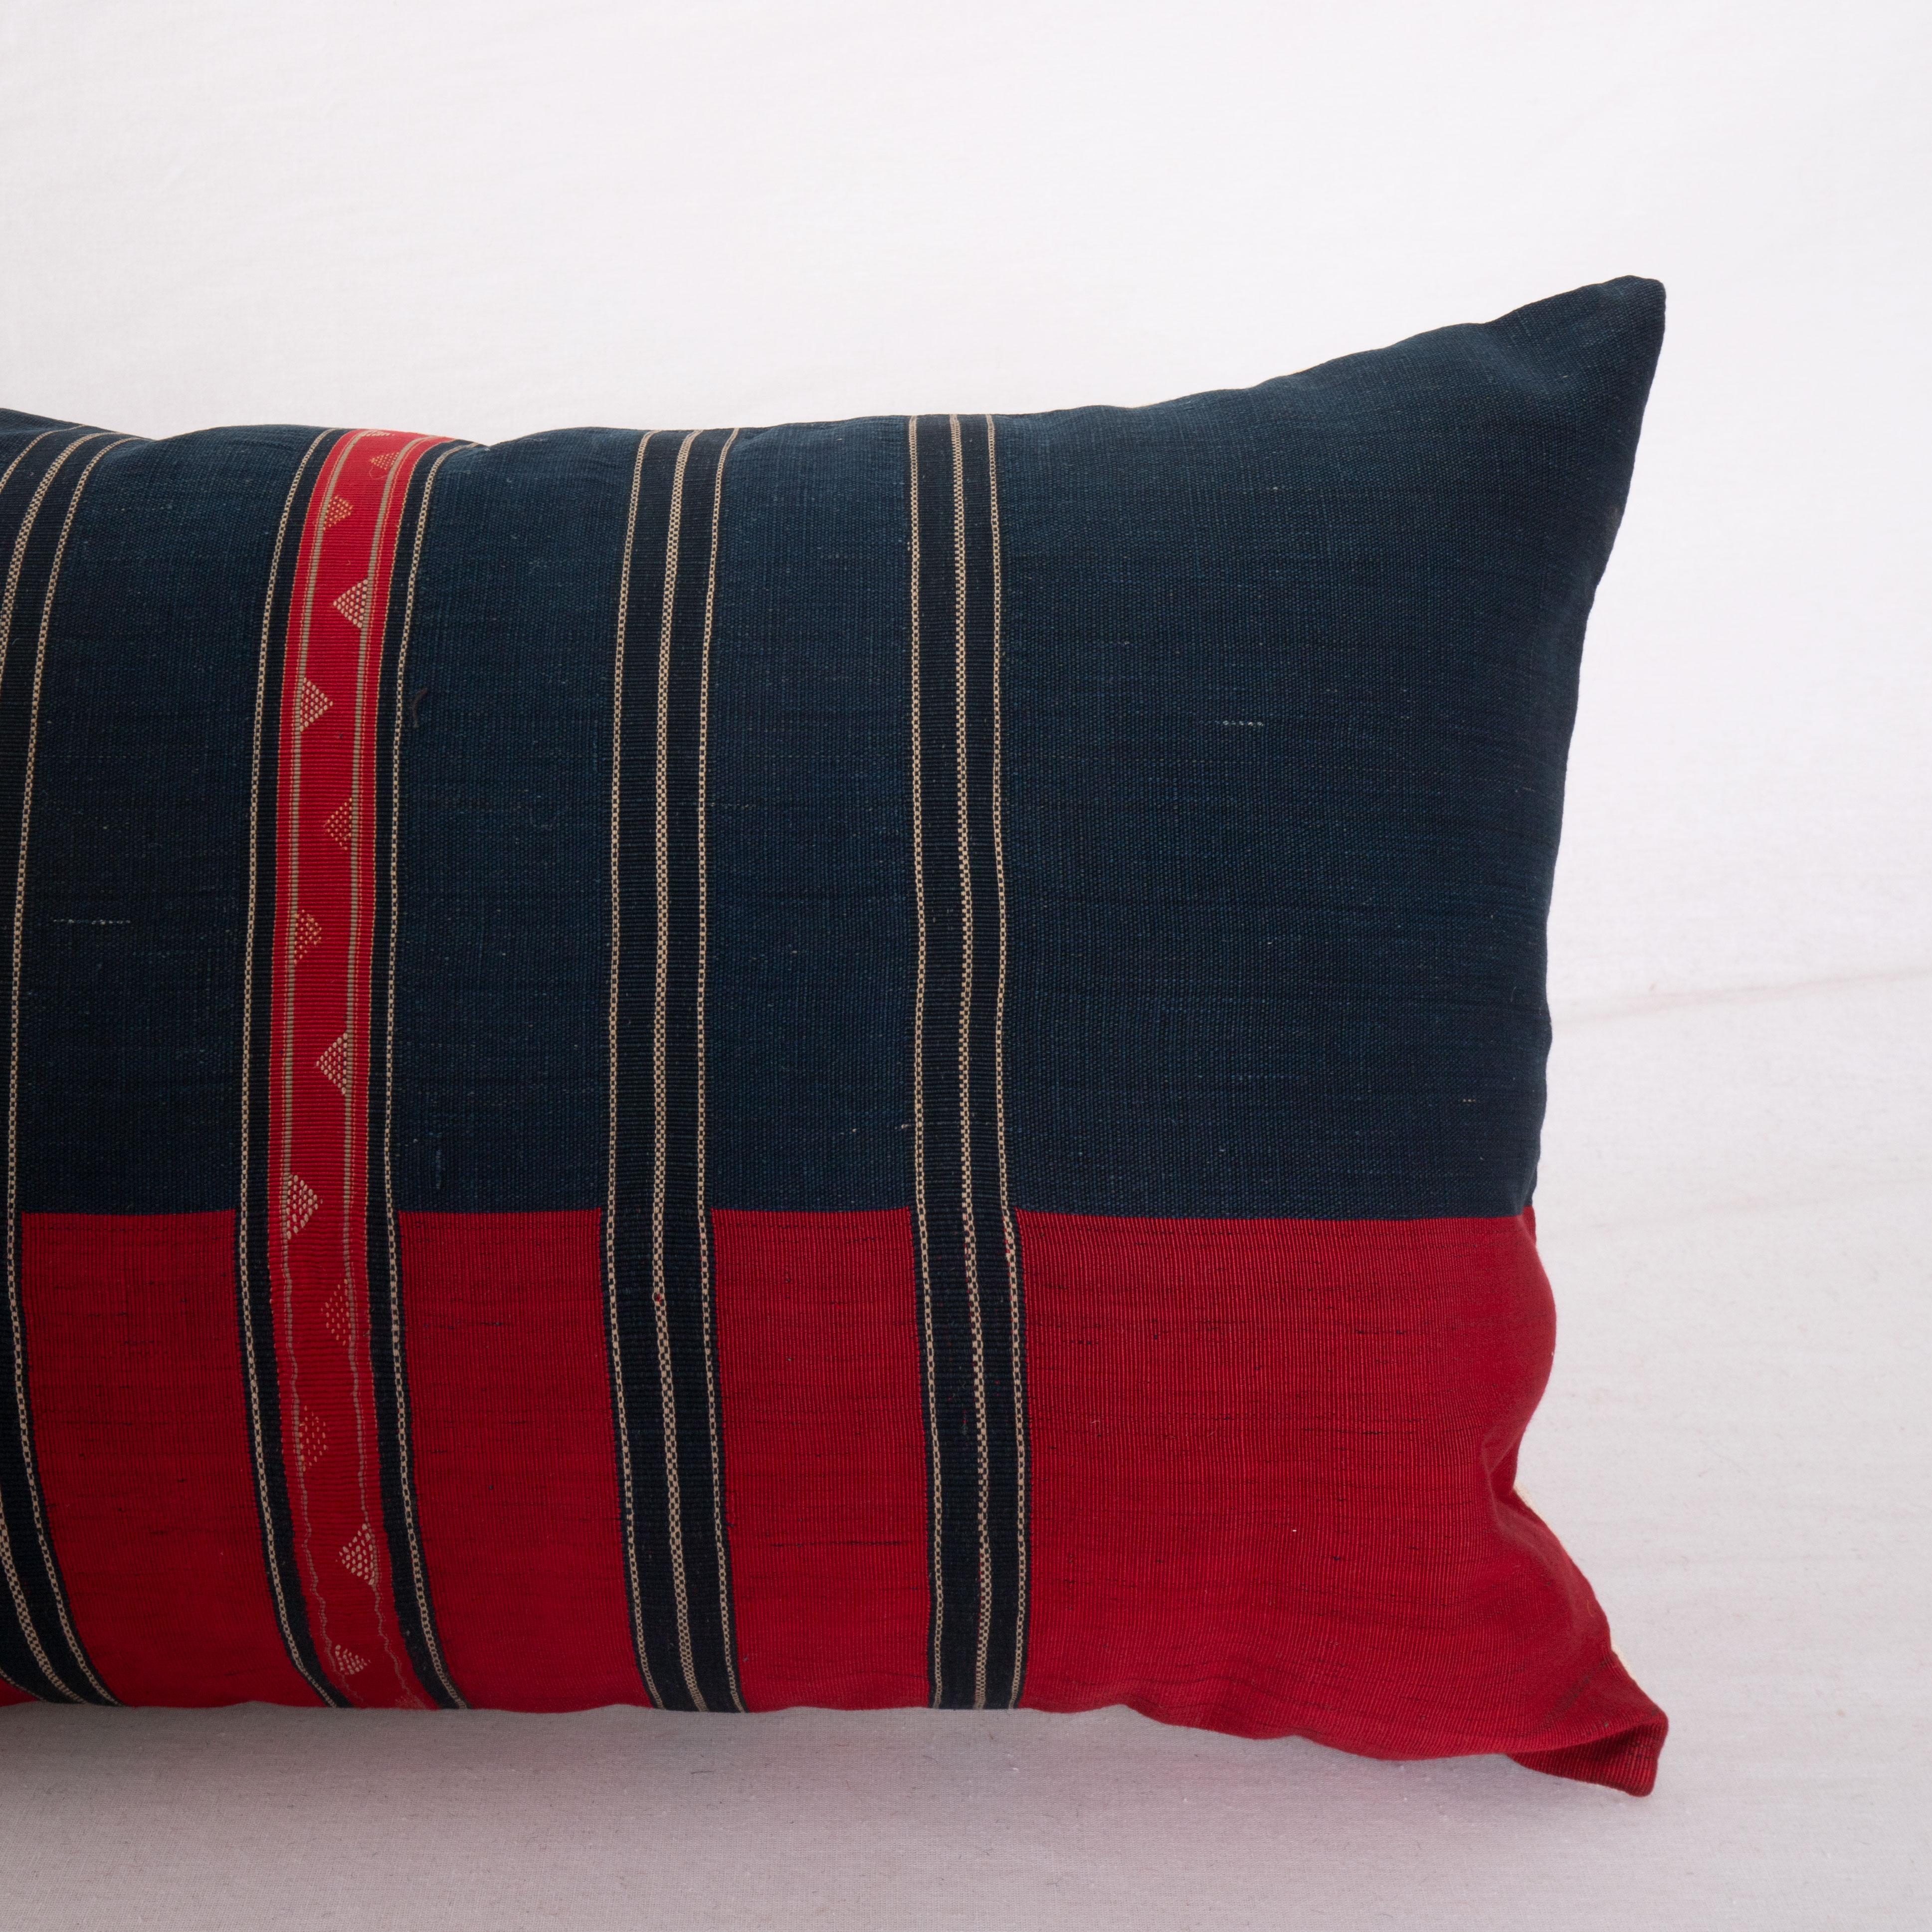 Hand-Woven Antique Silk and Cotton Waziri Shawl Pillow Cover Afghanistan Early 20th Century